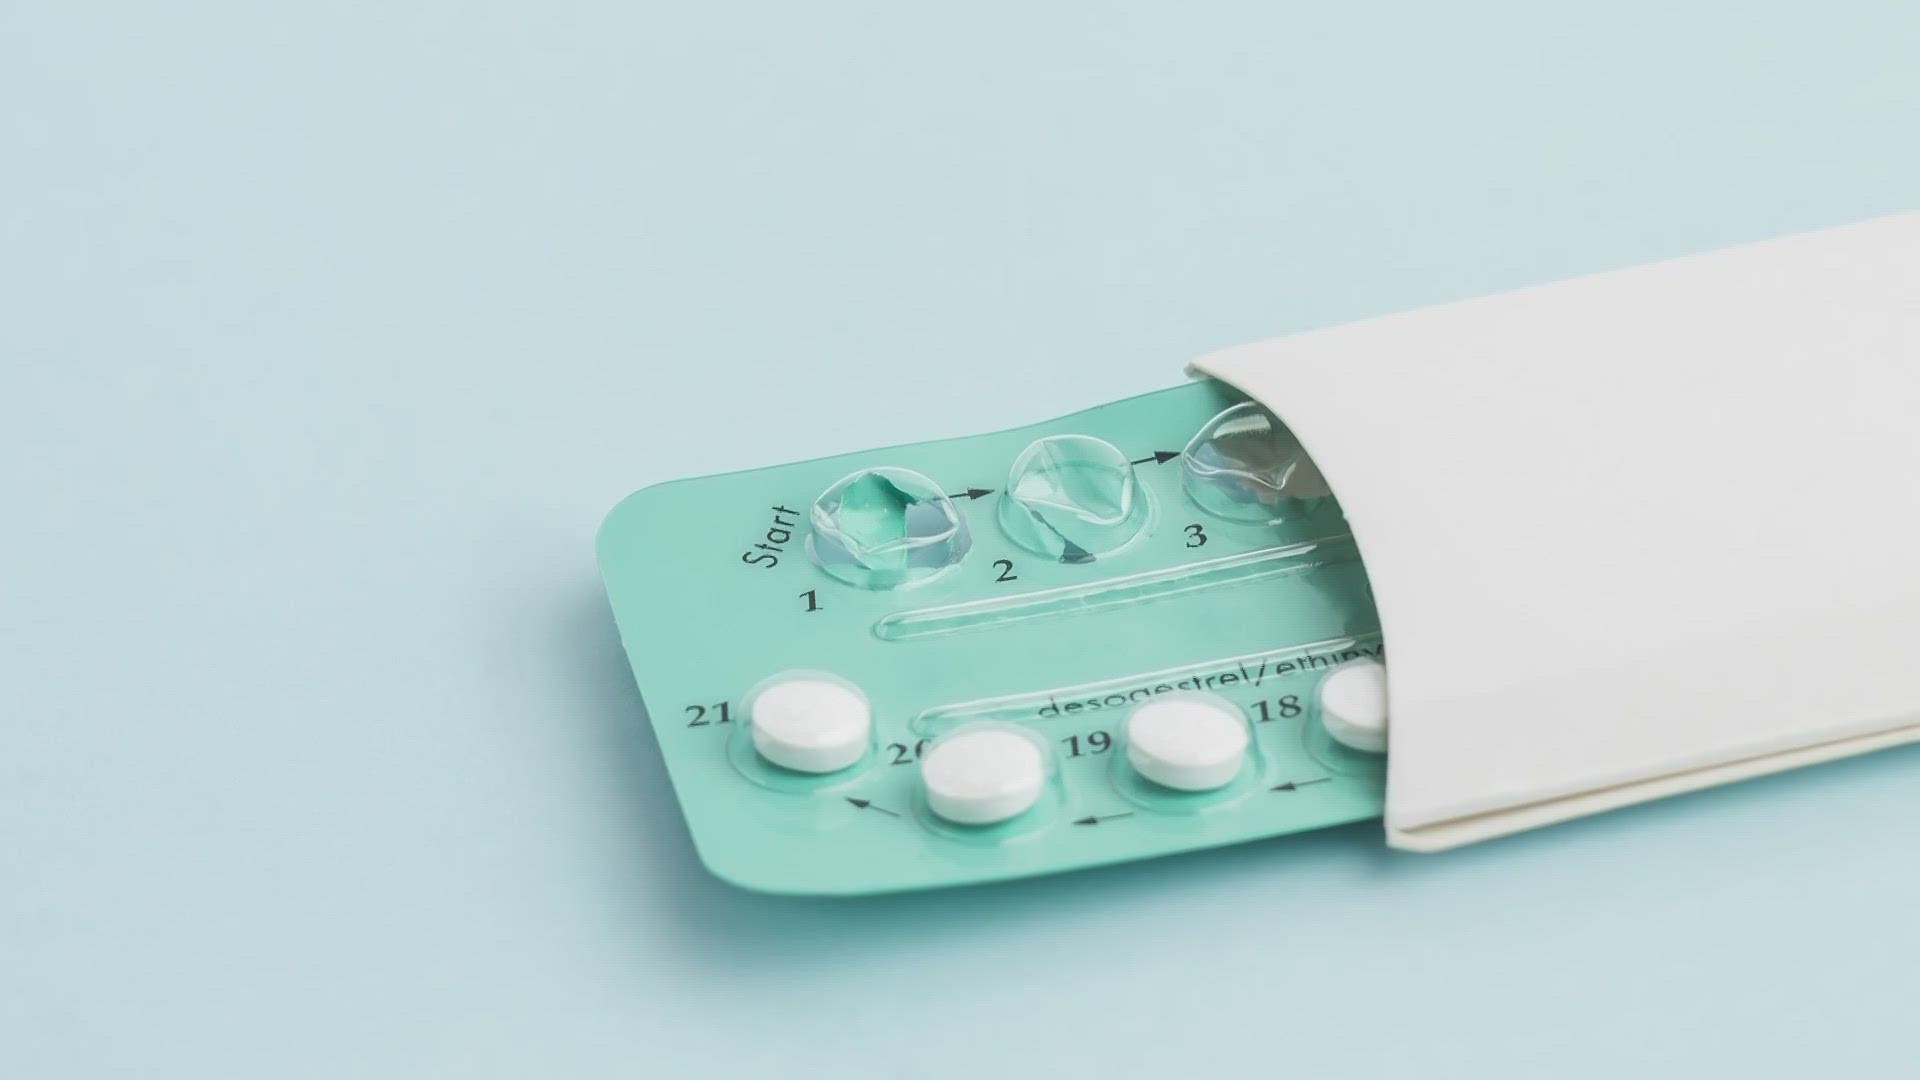 Harris County leaders want to expand contraception due to Texas' trigger law taking effect, making abortion in the state a felony.